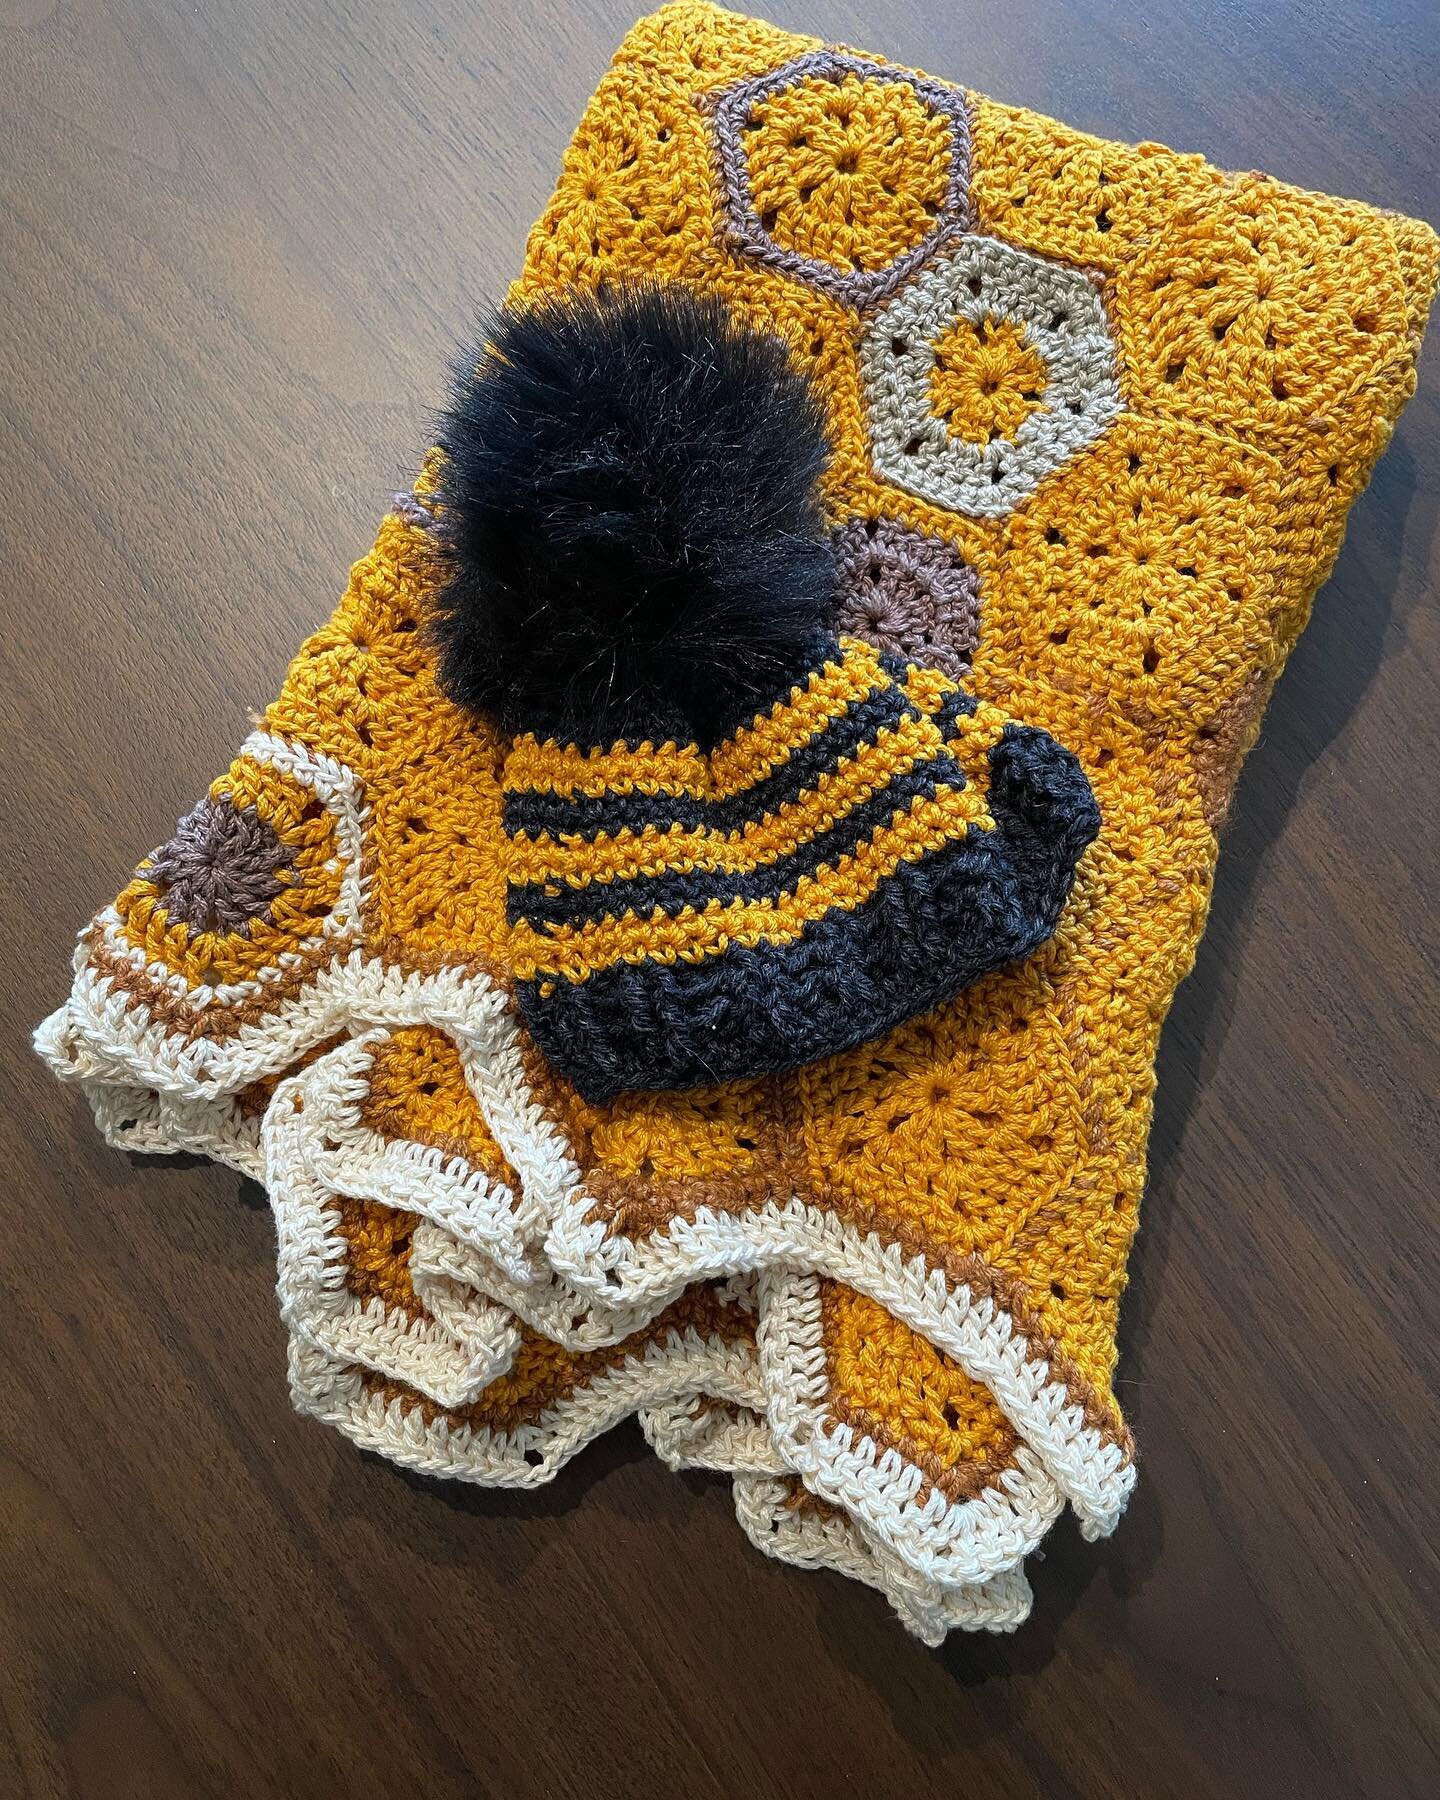 I was overjoyed to present this honeycomb blanket and bumble bee hat combo to my brother @iangauger &amp; his wife Molly, for their baby shower a couple of weeks ago 💖🐝 I&rsquo;ve been crocheting up a storm lately but have barely stopped to snap an